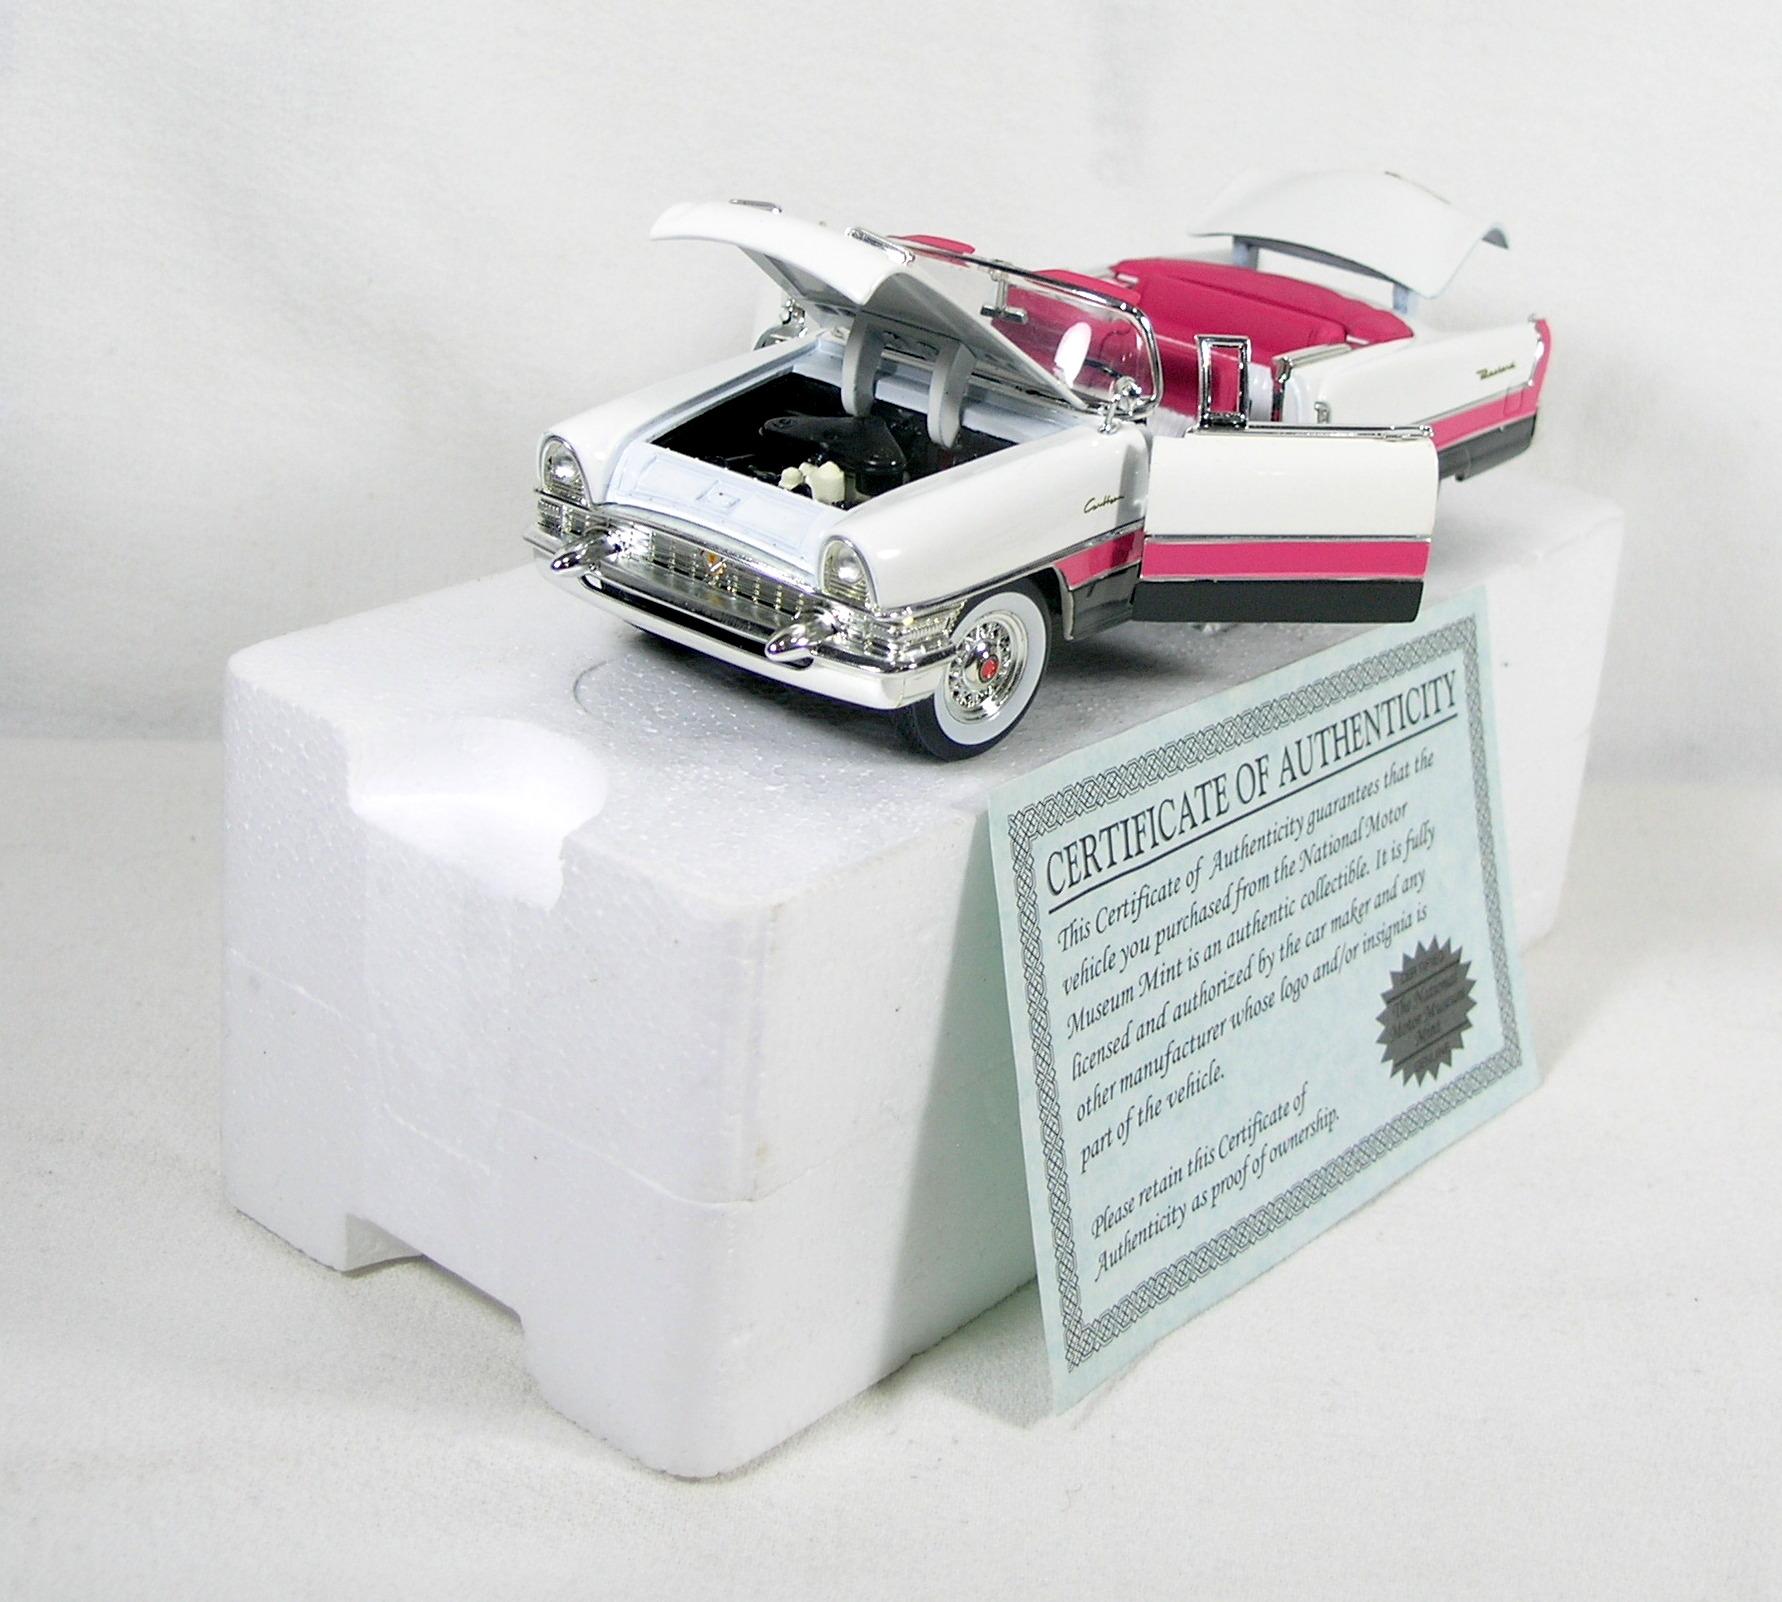 Diecast Replica of 1955 Packard Caribbean from Signature Models for Nationa